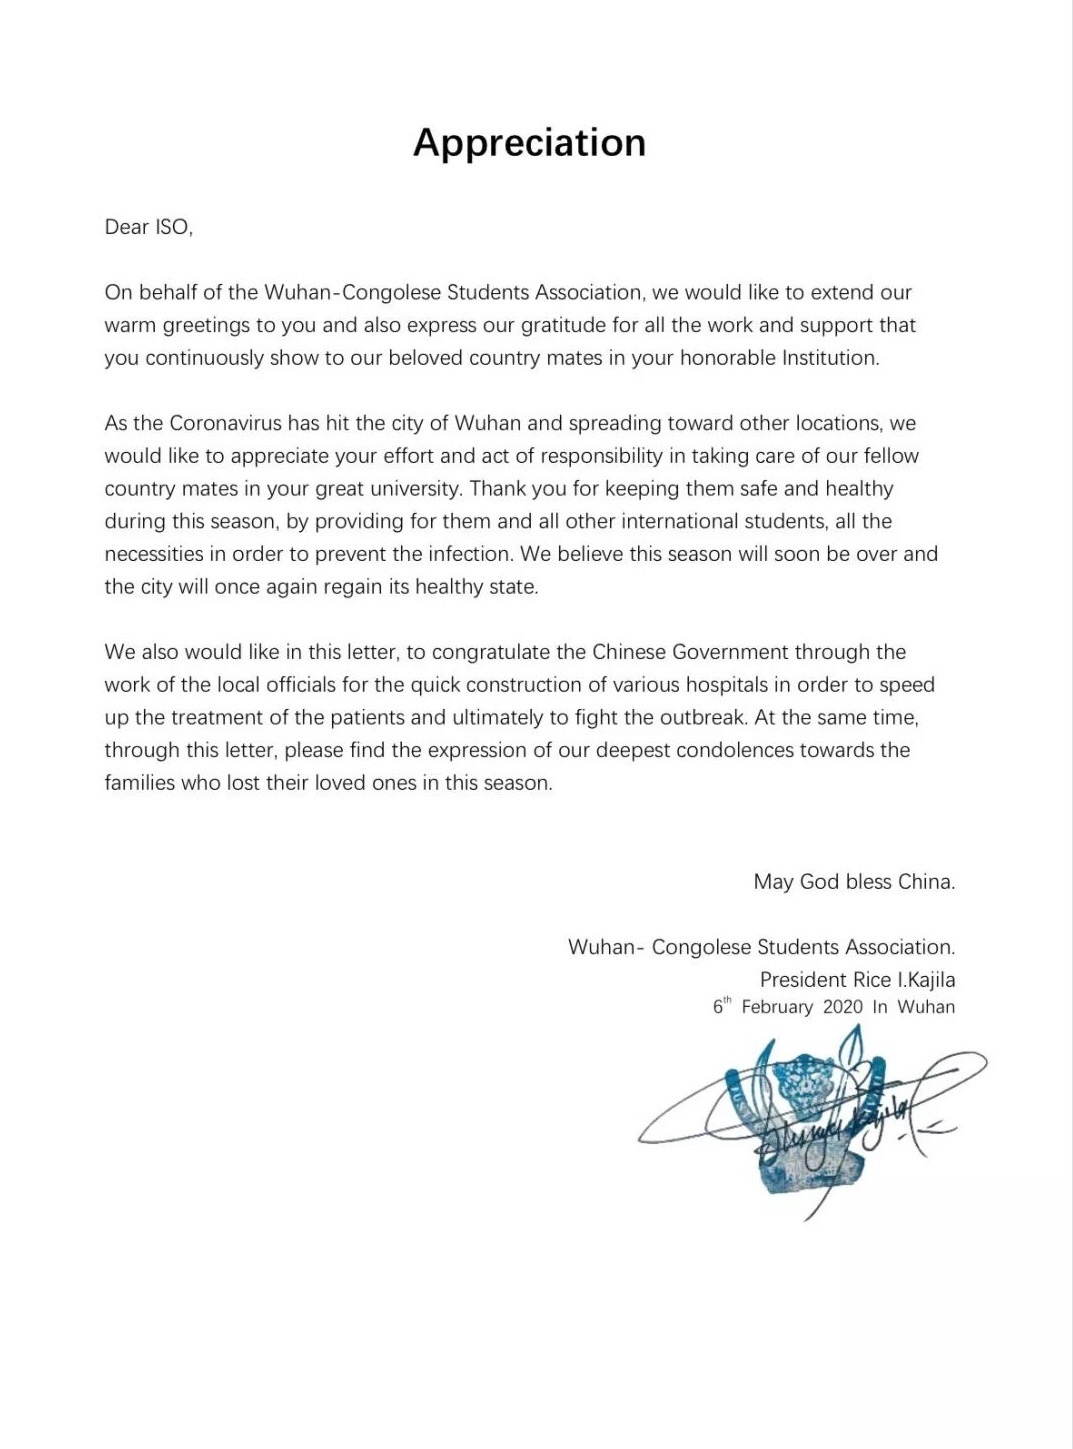 Stand with China: Congolese int'l student wrote letter of appreciation to universities in Wuhan